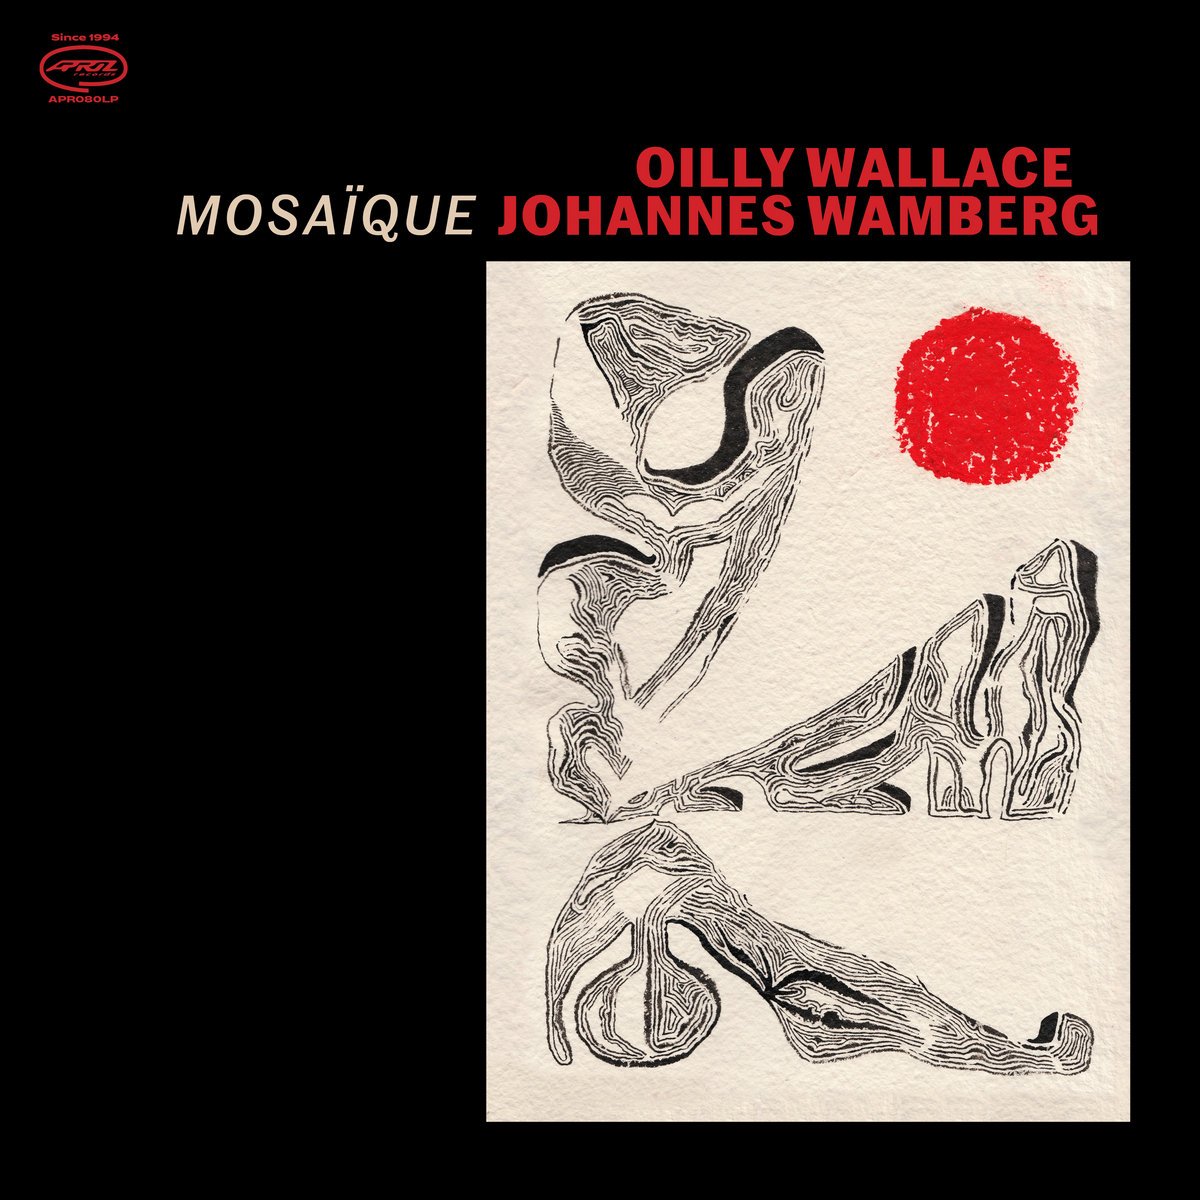 CD Shop - WALLACE, OILLY  & JOHANNE MOSAIQUE